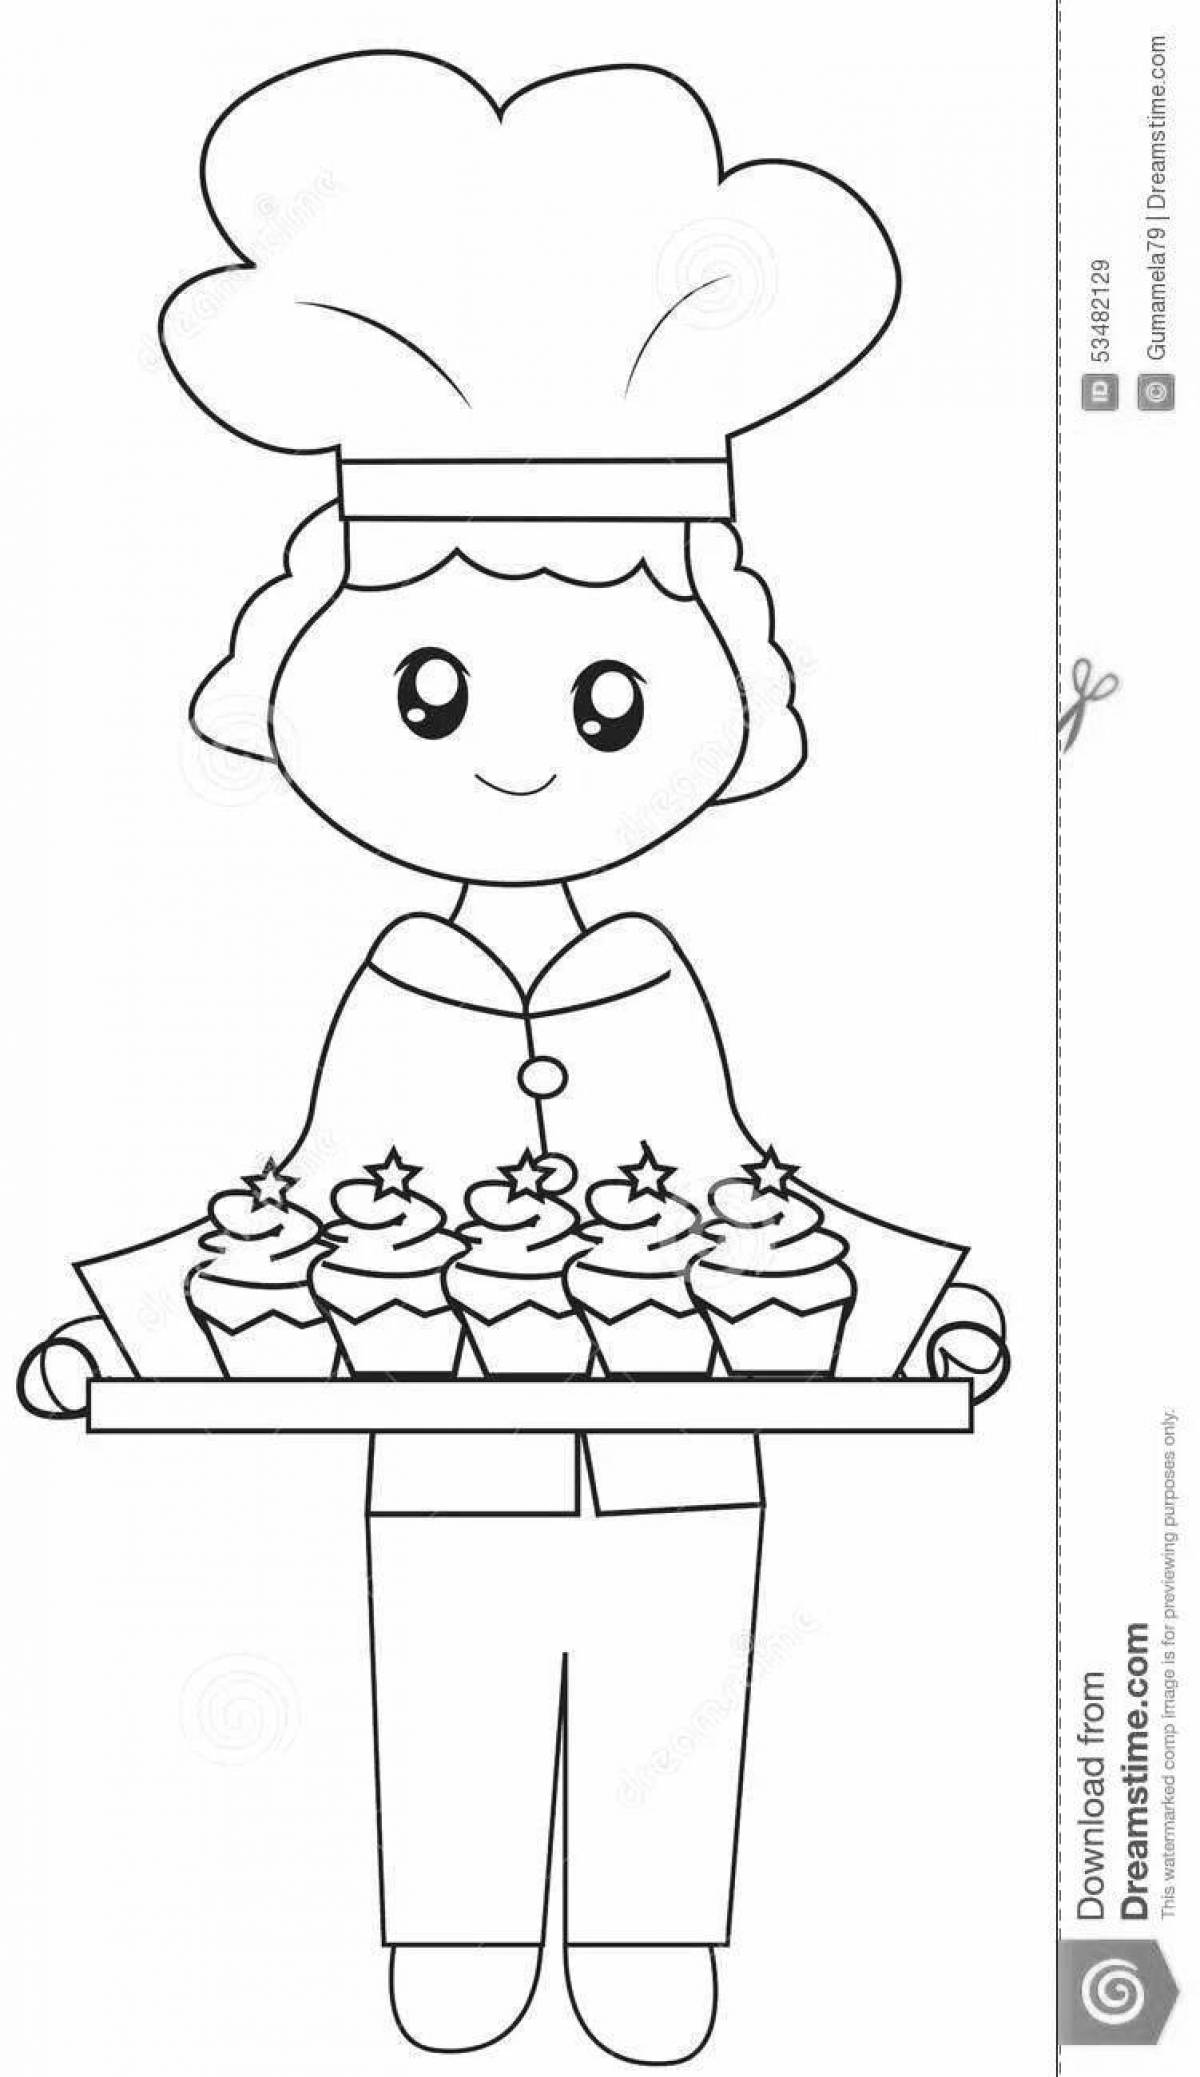 Fancy confectionery coloring book for kids